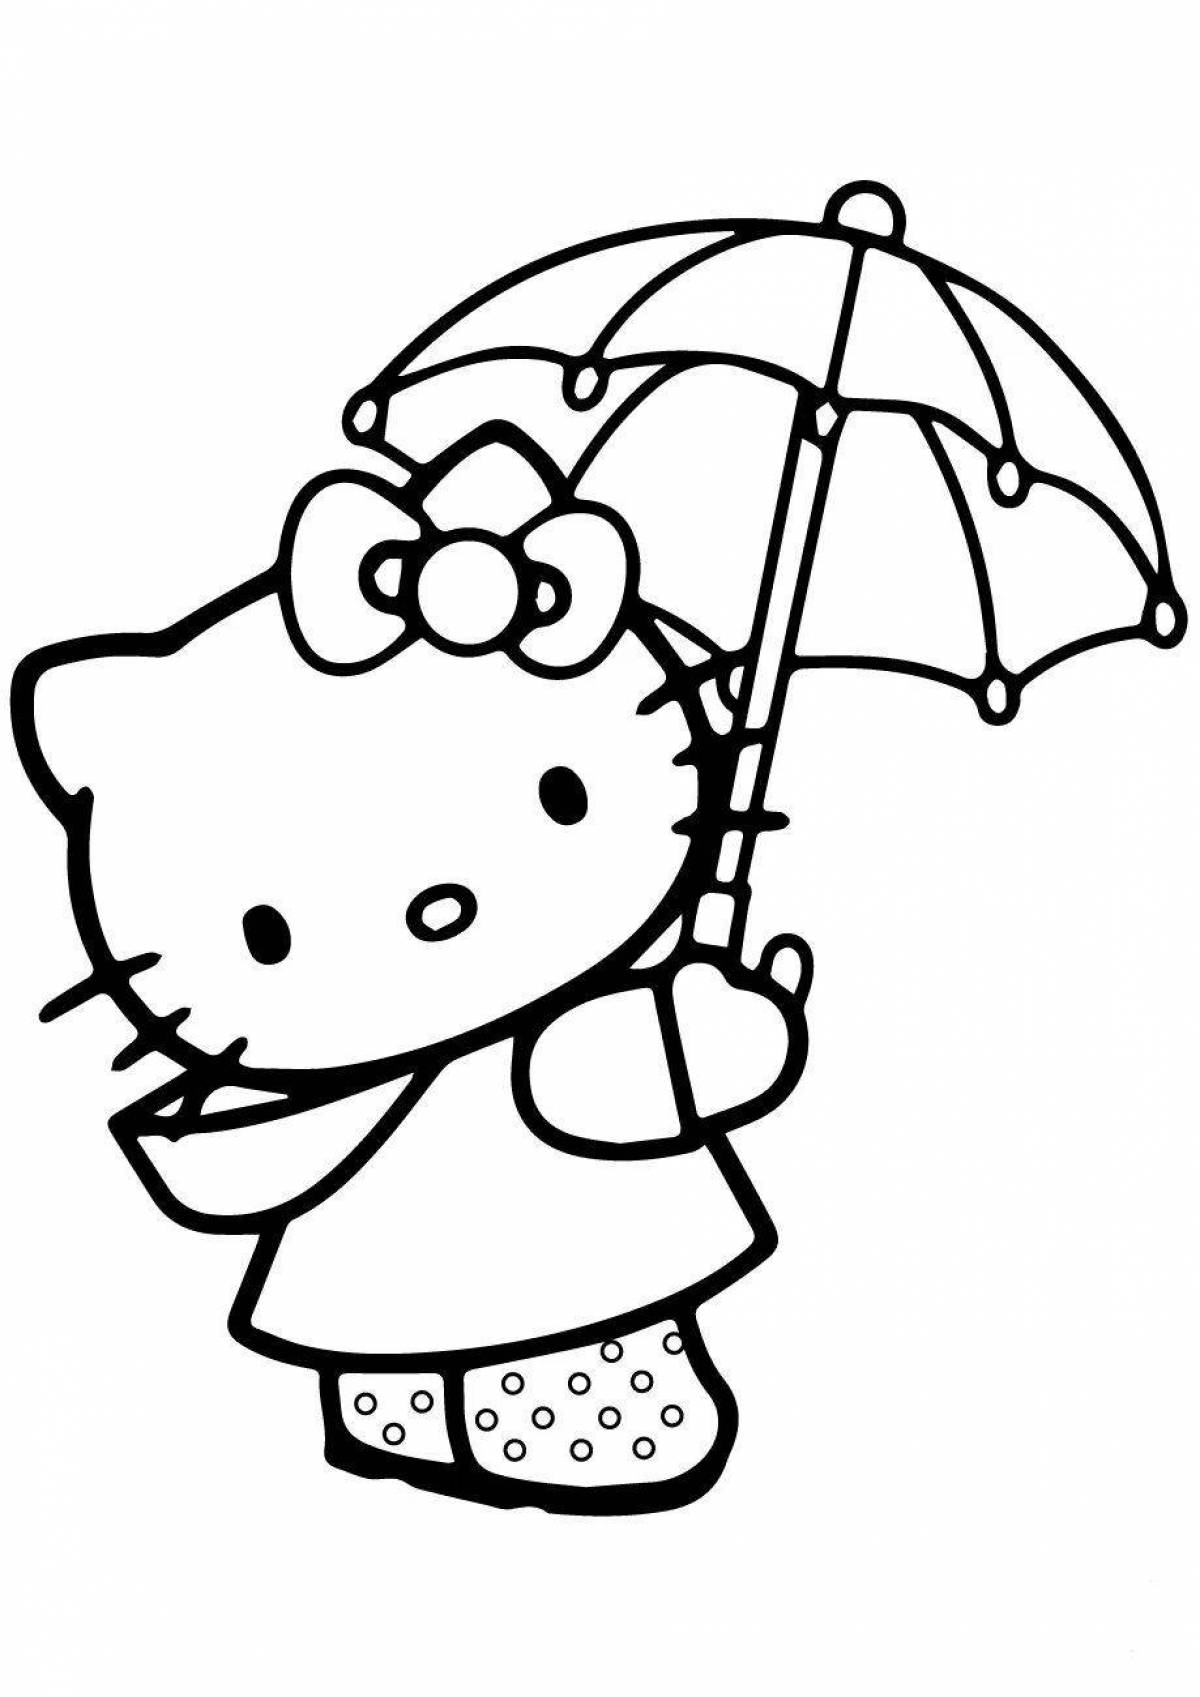 Snuggly coloring page kitty для девочек